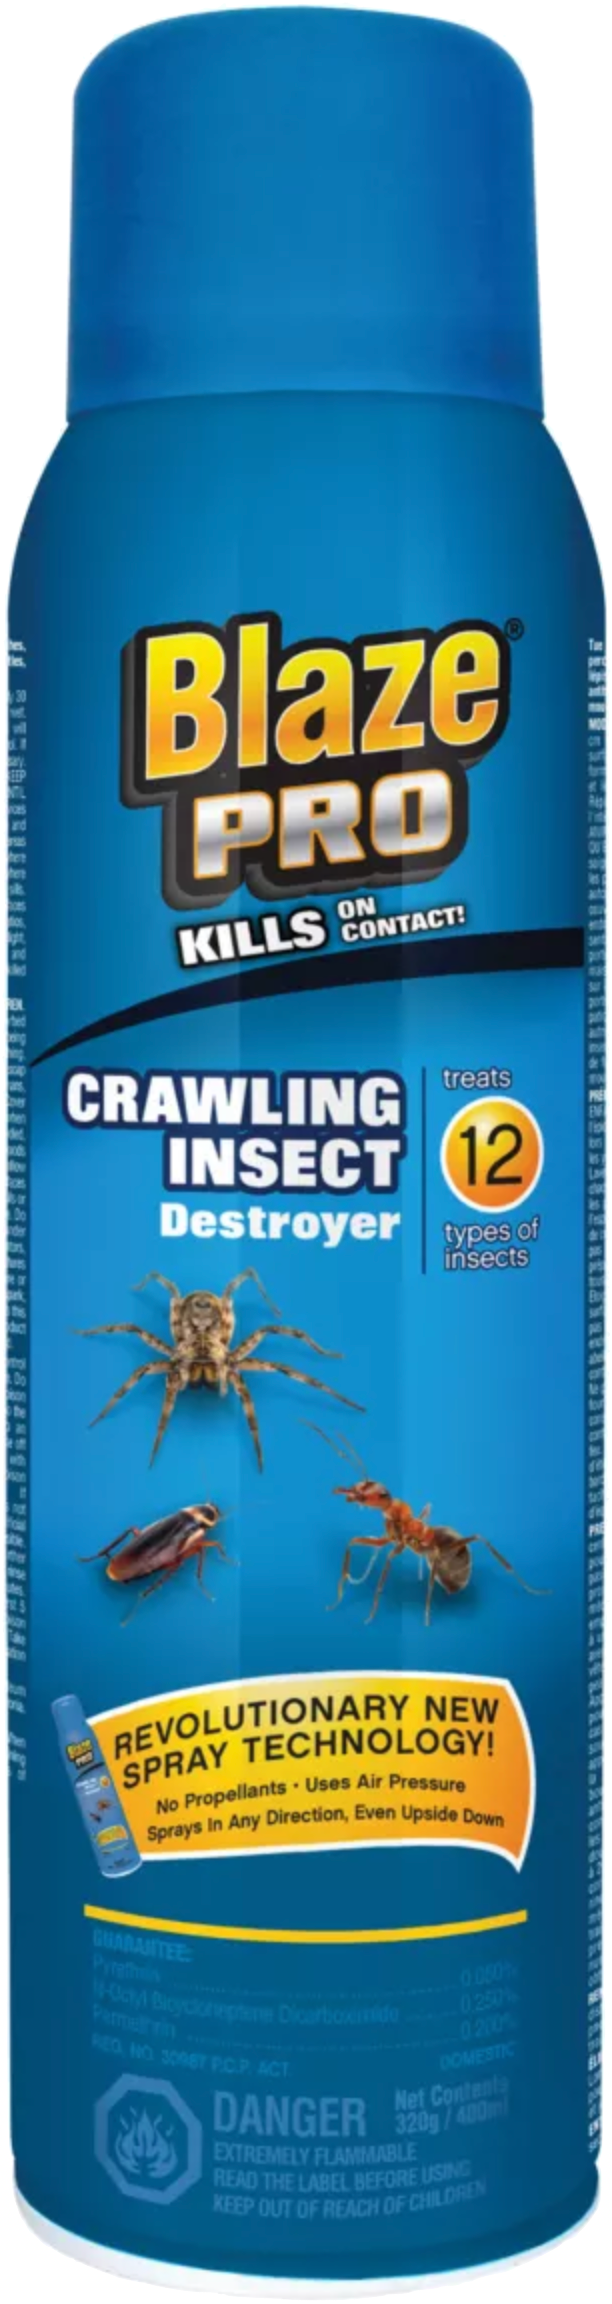 Blaze Pro Crawling Insect Destroyer 320g - Quecan